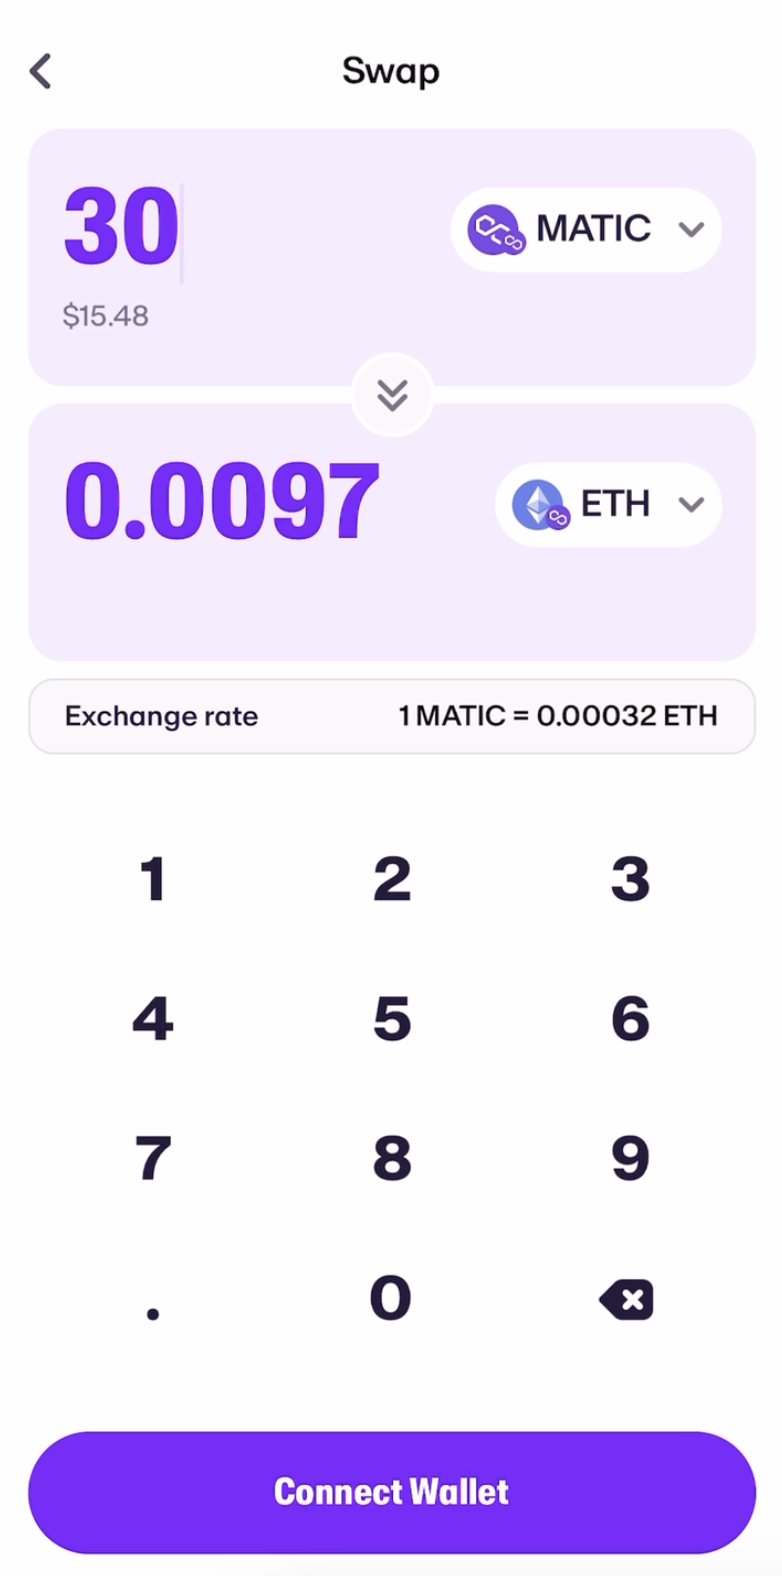 A screenshot of a MoonPay Swap exchange between MATIC (Polygon) and ETH (Ethereum).